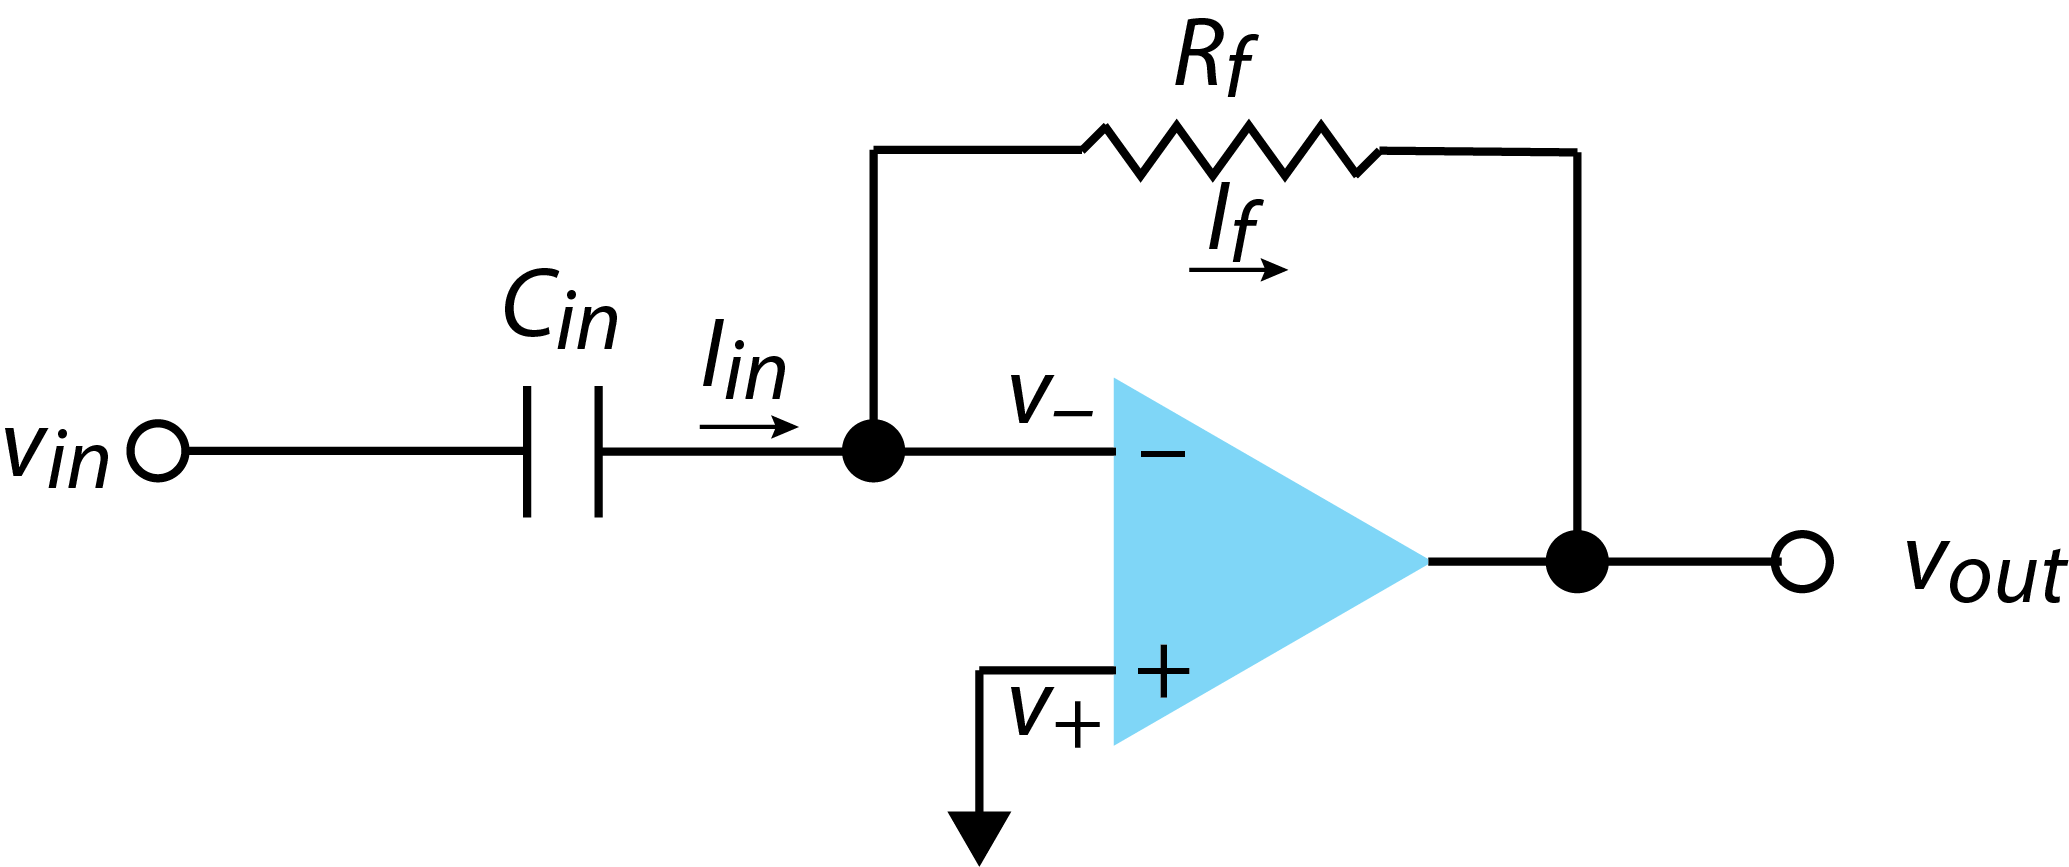 Differentiation using an operational amplifer.